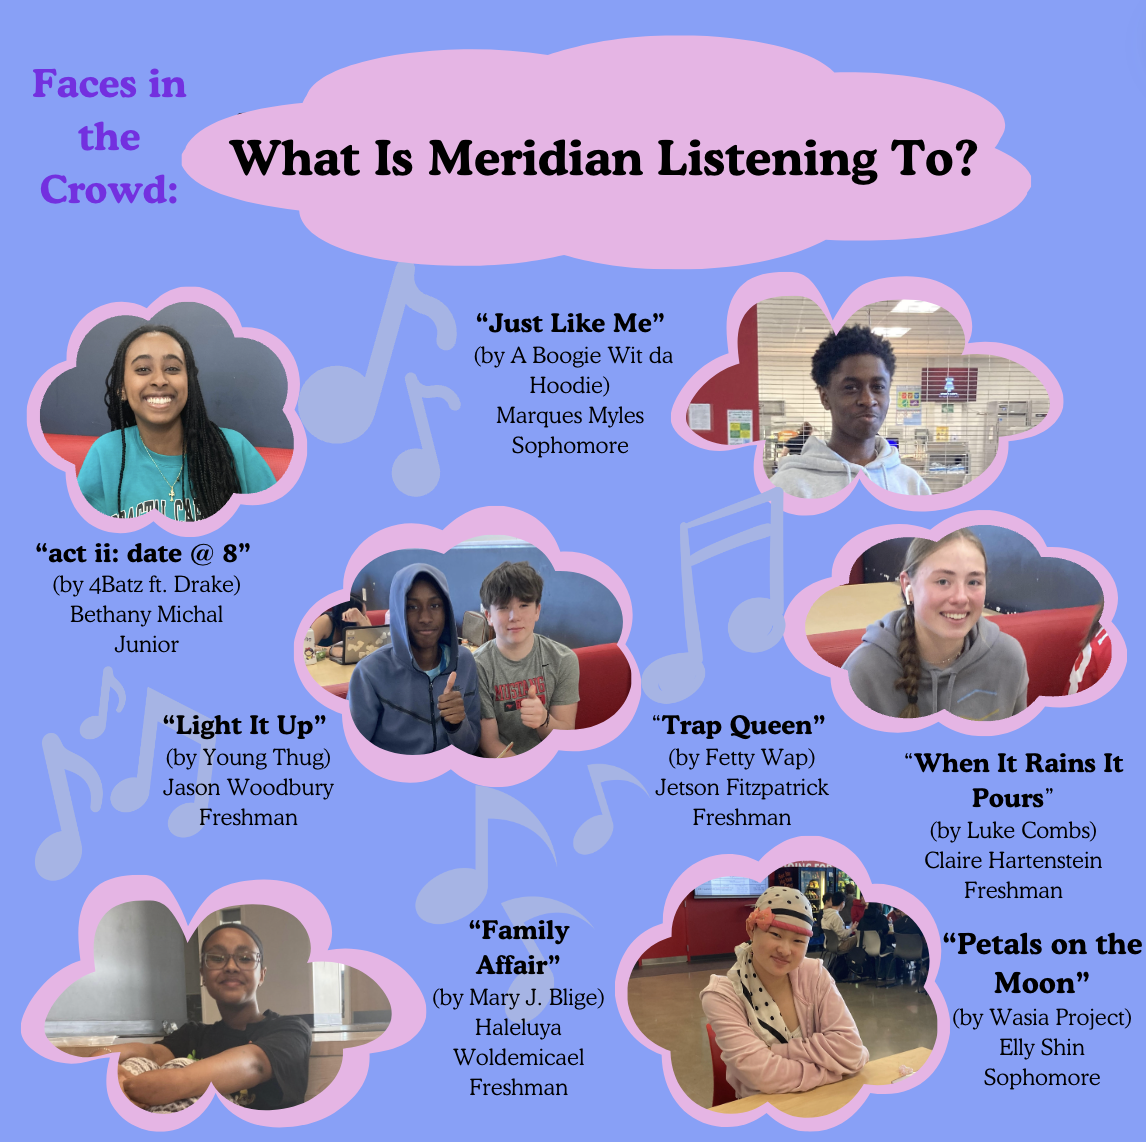 What is Meridian listening to?